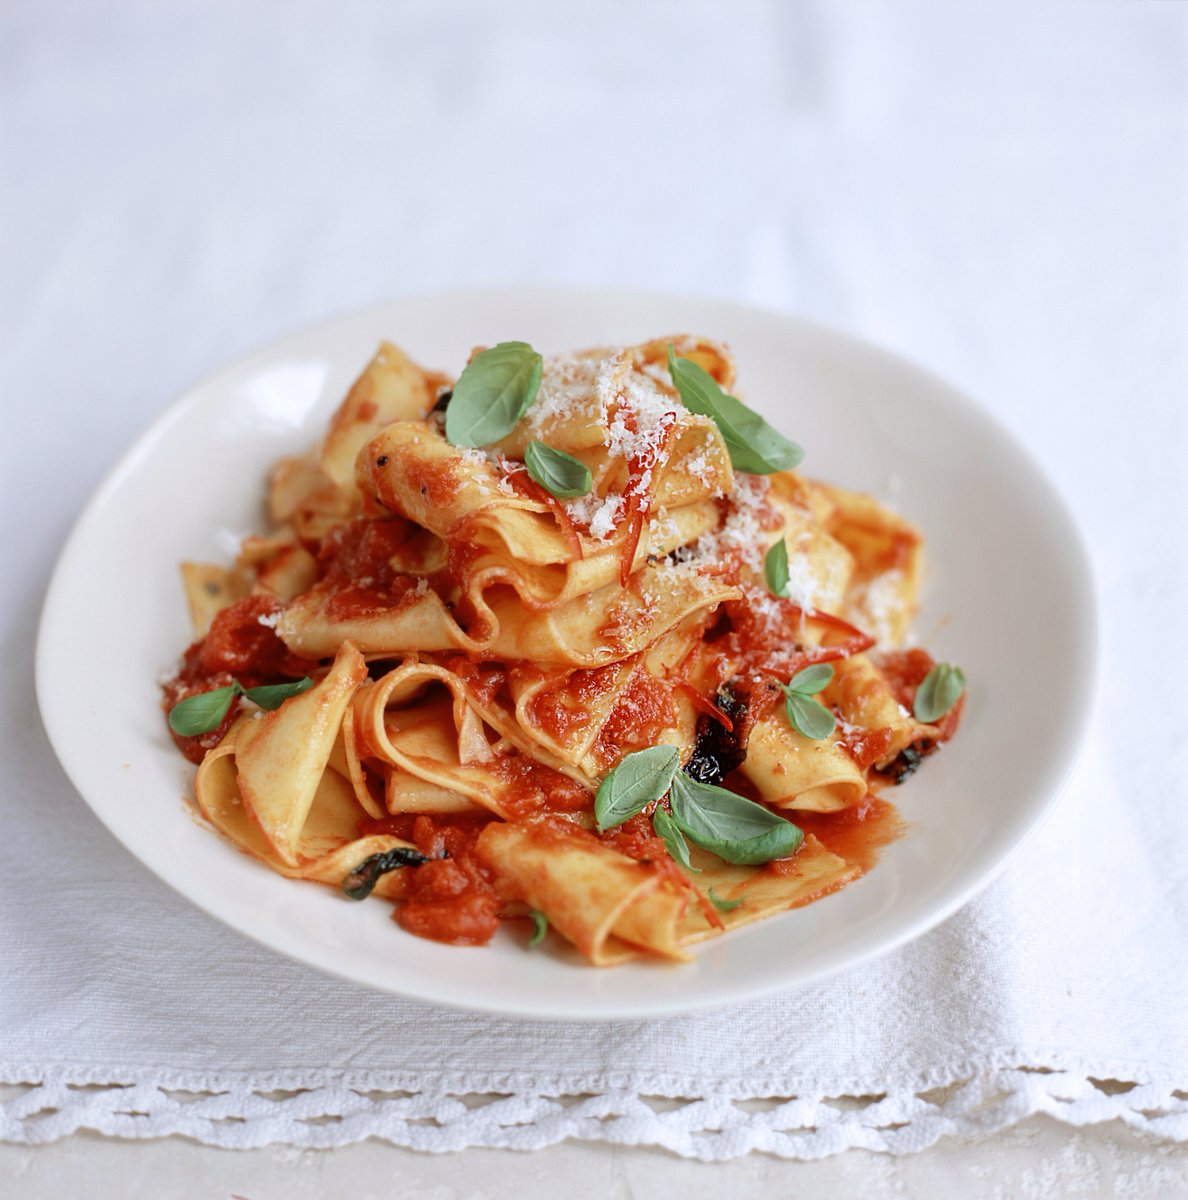 #RecipeOfTheDay - This tomato sauce may be simple, but boy does it taste special! https://t.co/4sXNMJUbpr https://t.co/imdiN7ksnu